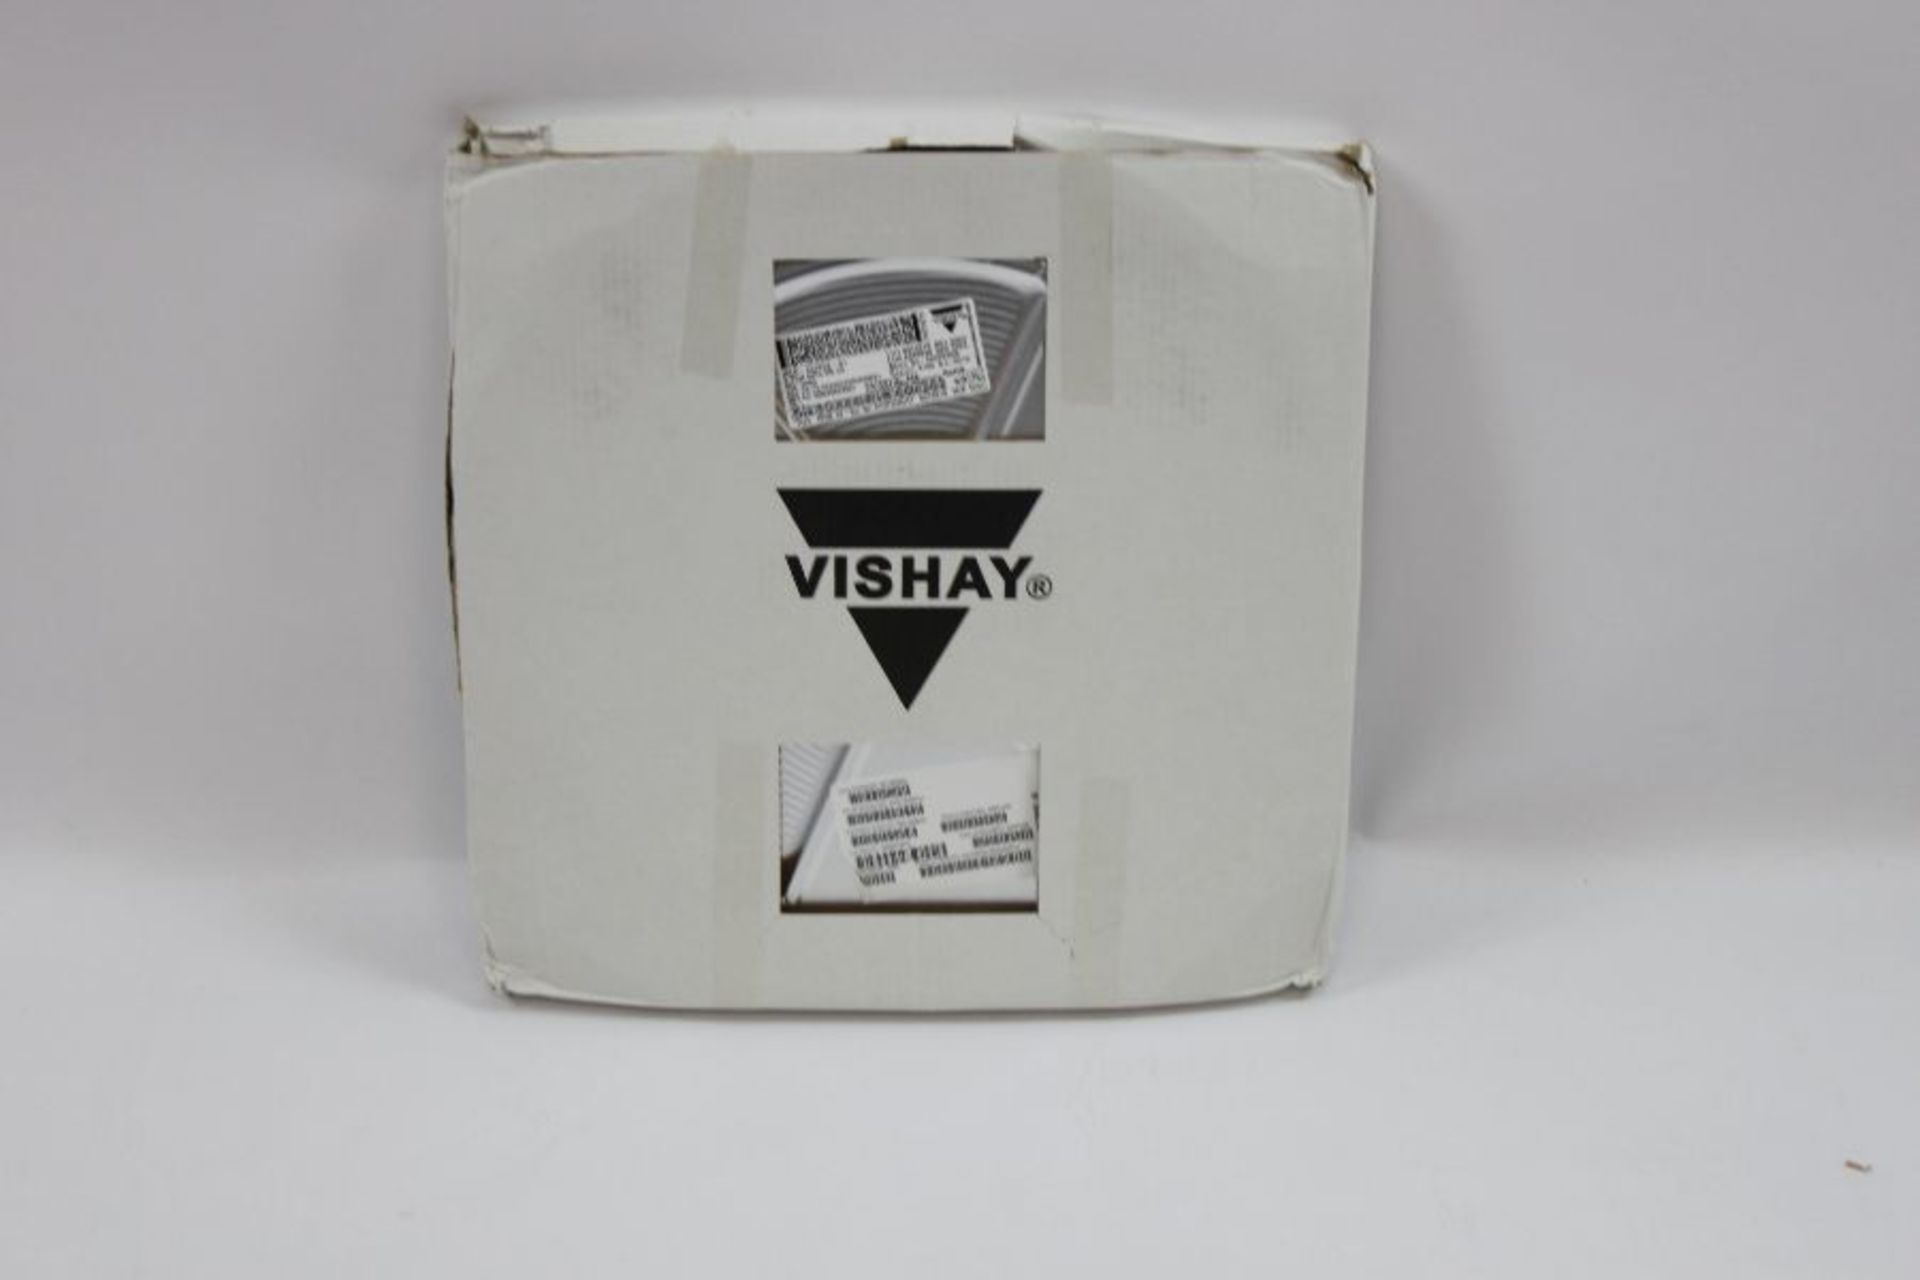 Seven Reels of Vishay Electrical Conductor, Part 34136968A, 2000 In Each Reel